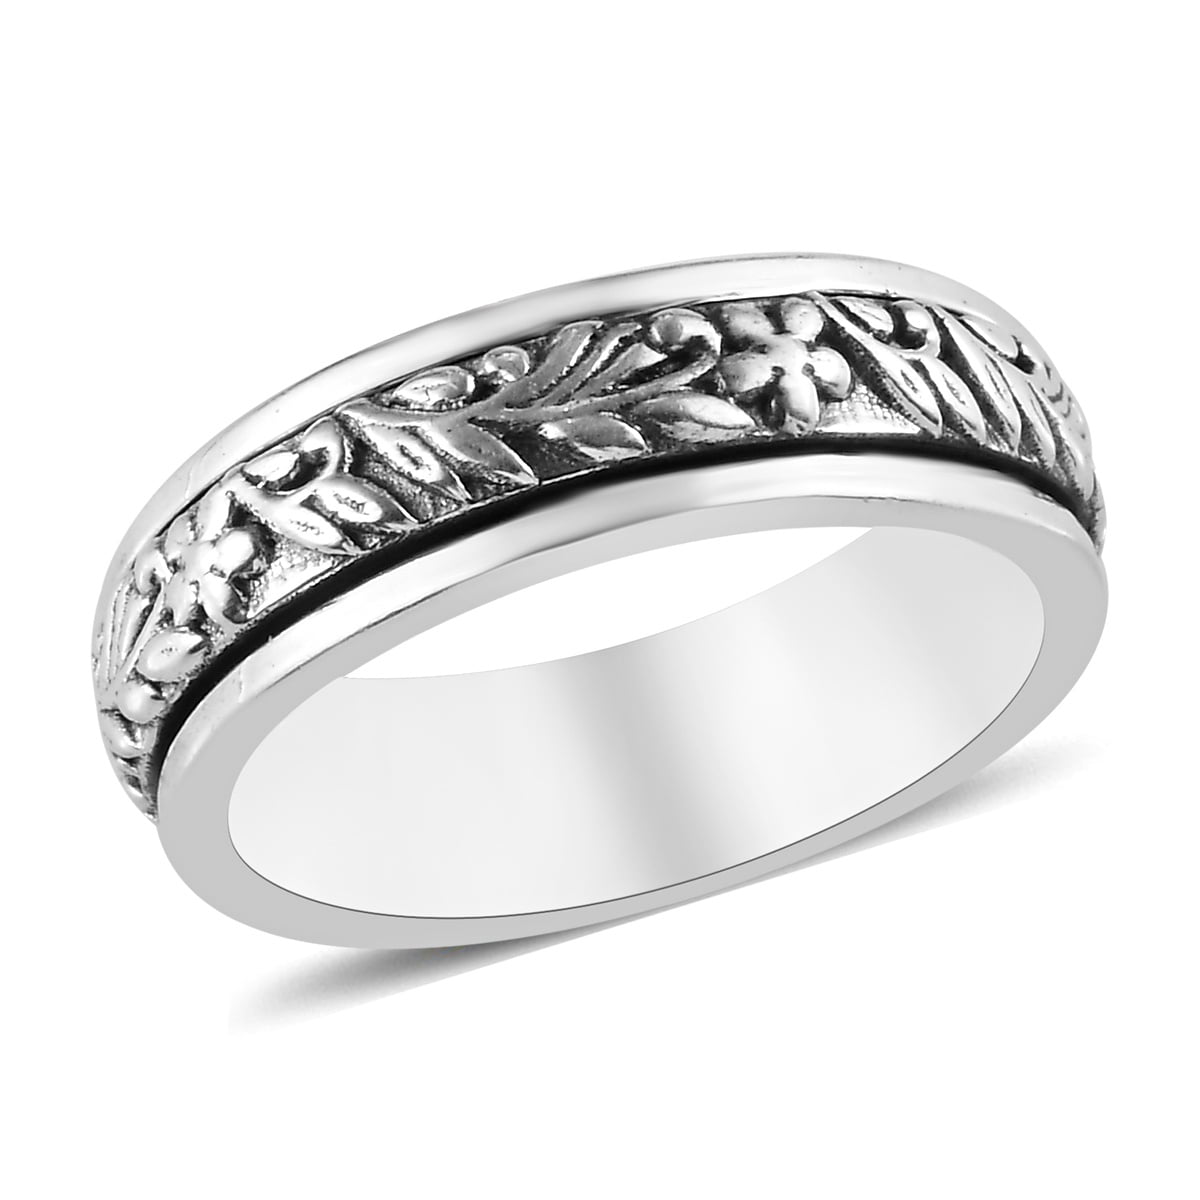 New Sterling Silver Celtic Cutout Heart Band Ring 6mm UK Sizes 925 Hallmarked